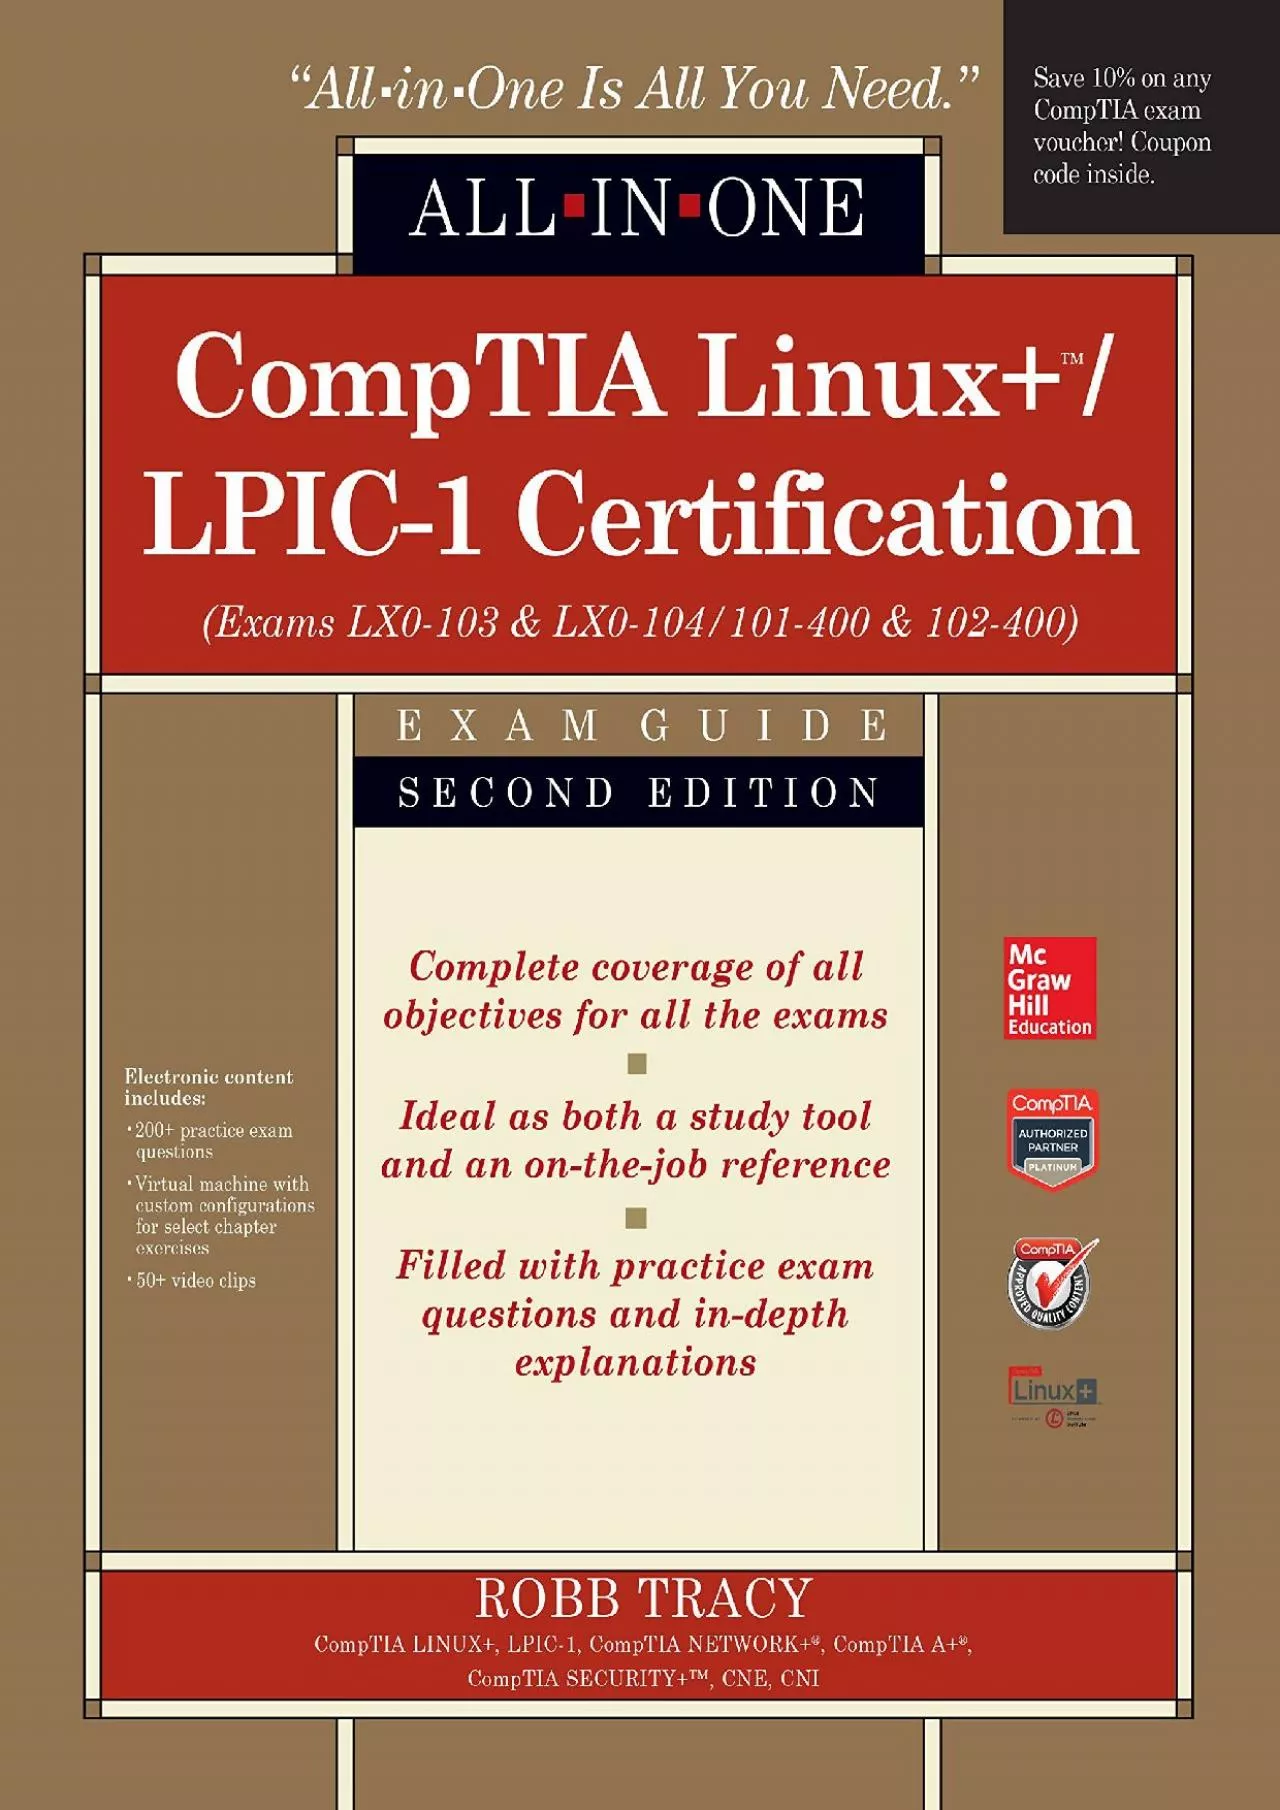 [PDF]-CompTIA Linux+/LPIC-1 Certification All-in-One Exam Guide, Second Edition (Exams